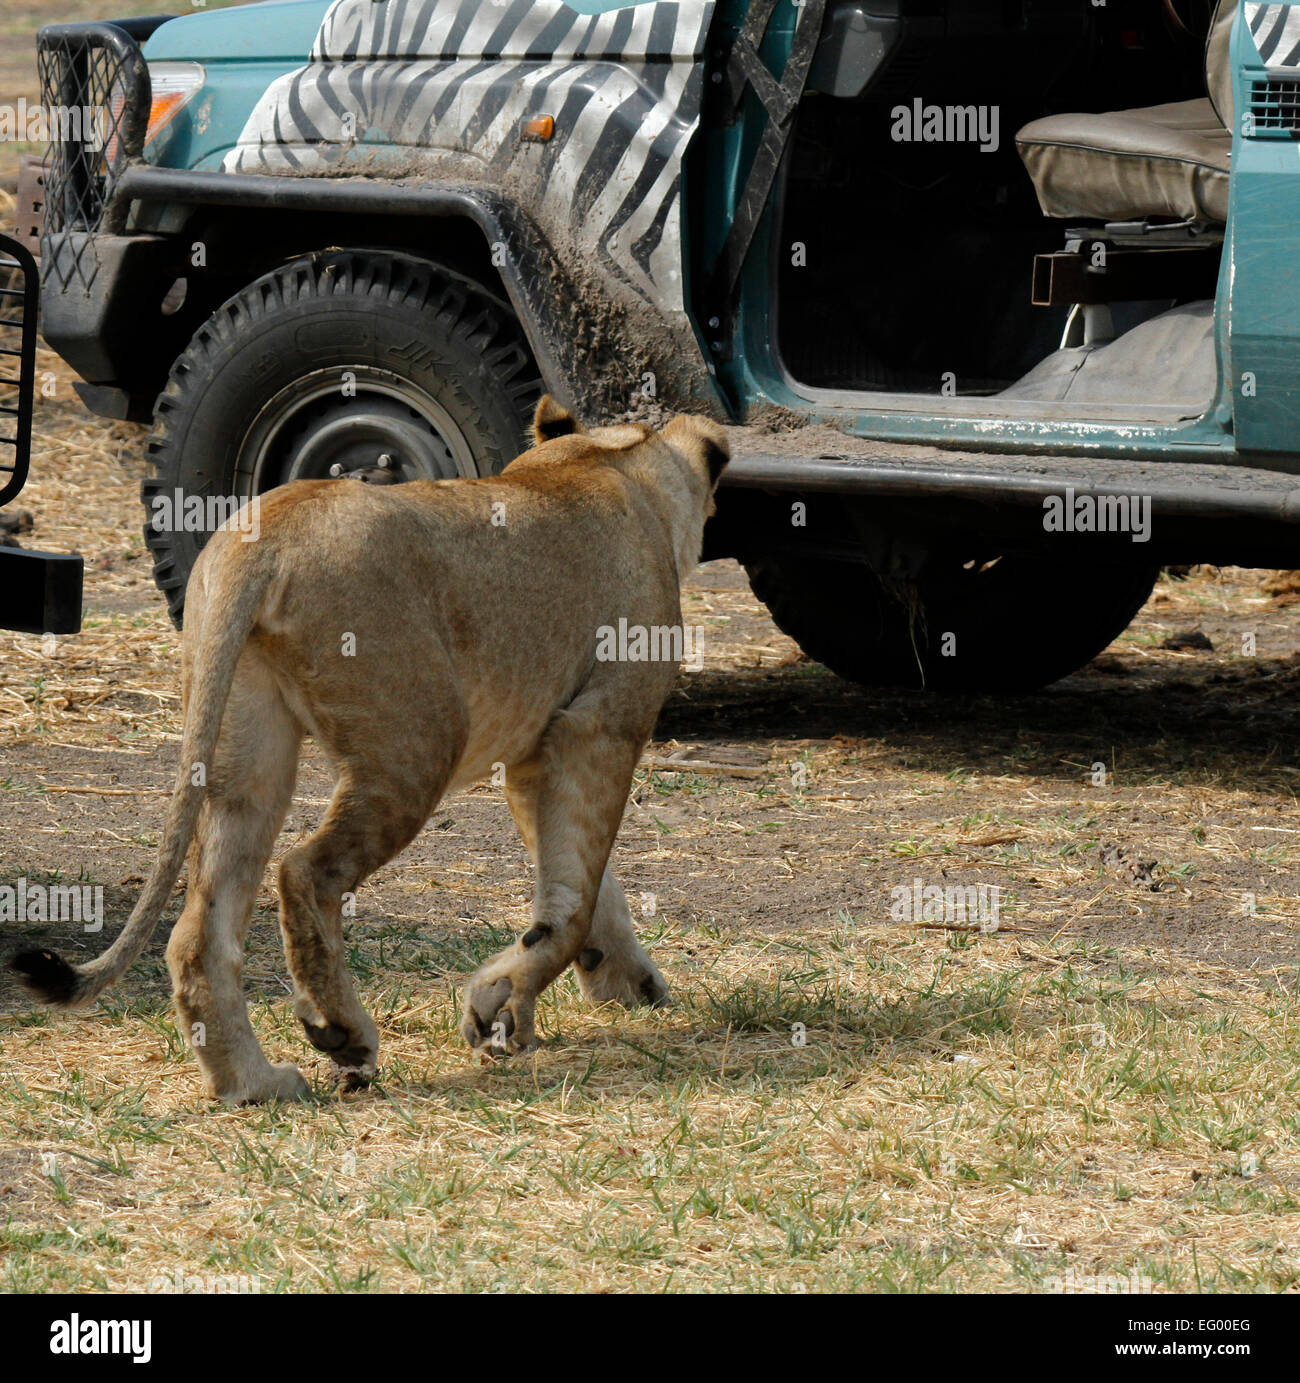 African Lioness walking around safari vehicles to find shade Golden tawny color camouflages them well Stock Photo